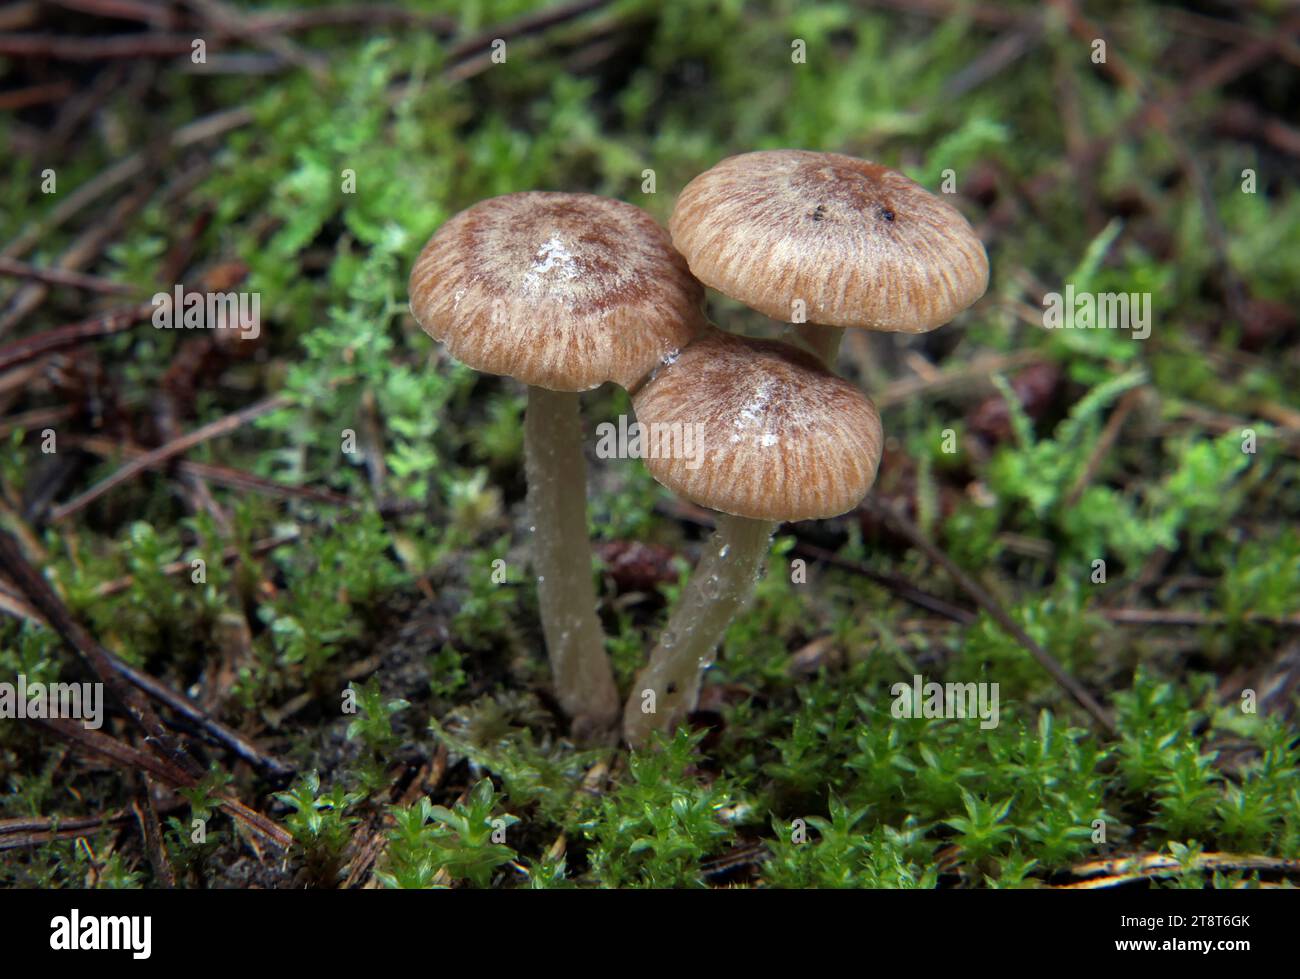 Inocybe, Inocybe is a large genus of mushroom-forming fungi with over 1400 species, including all forms and variations Stock Photo